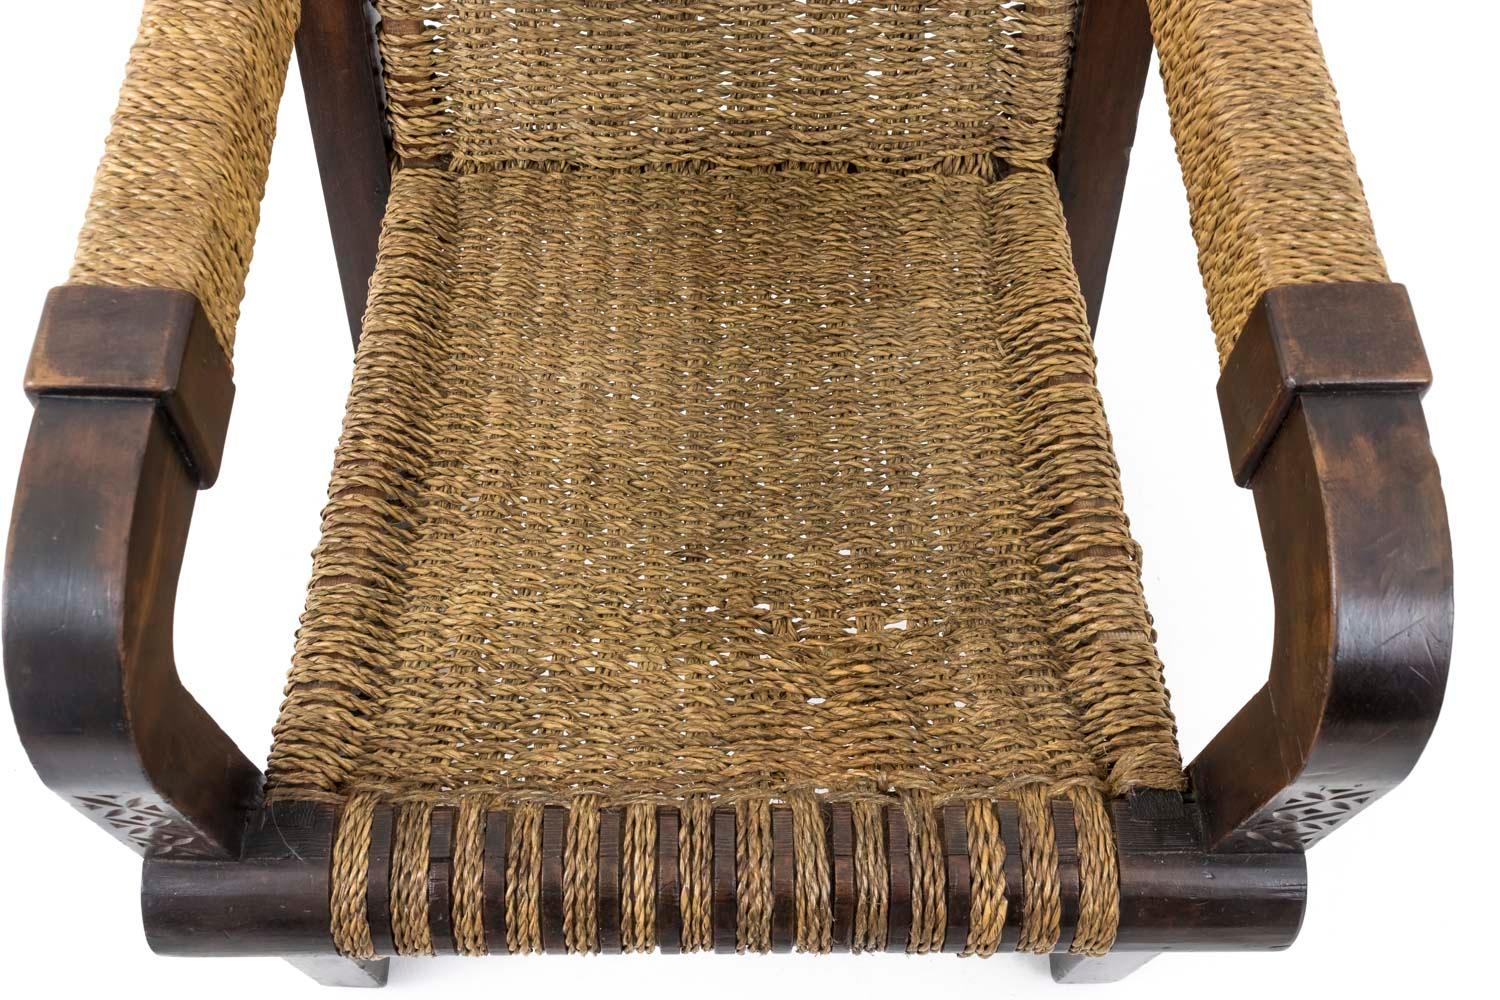 Wood Francis Jourdain style Armchair in wood and Ropes, Art Deco Period